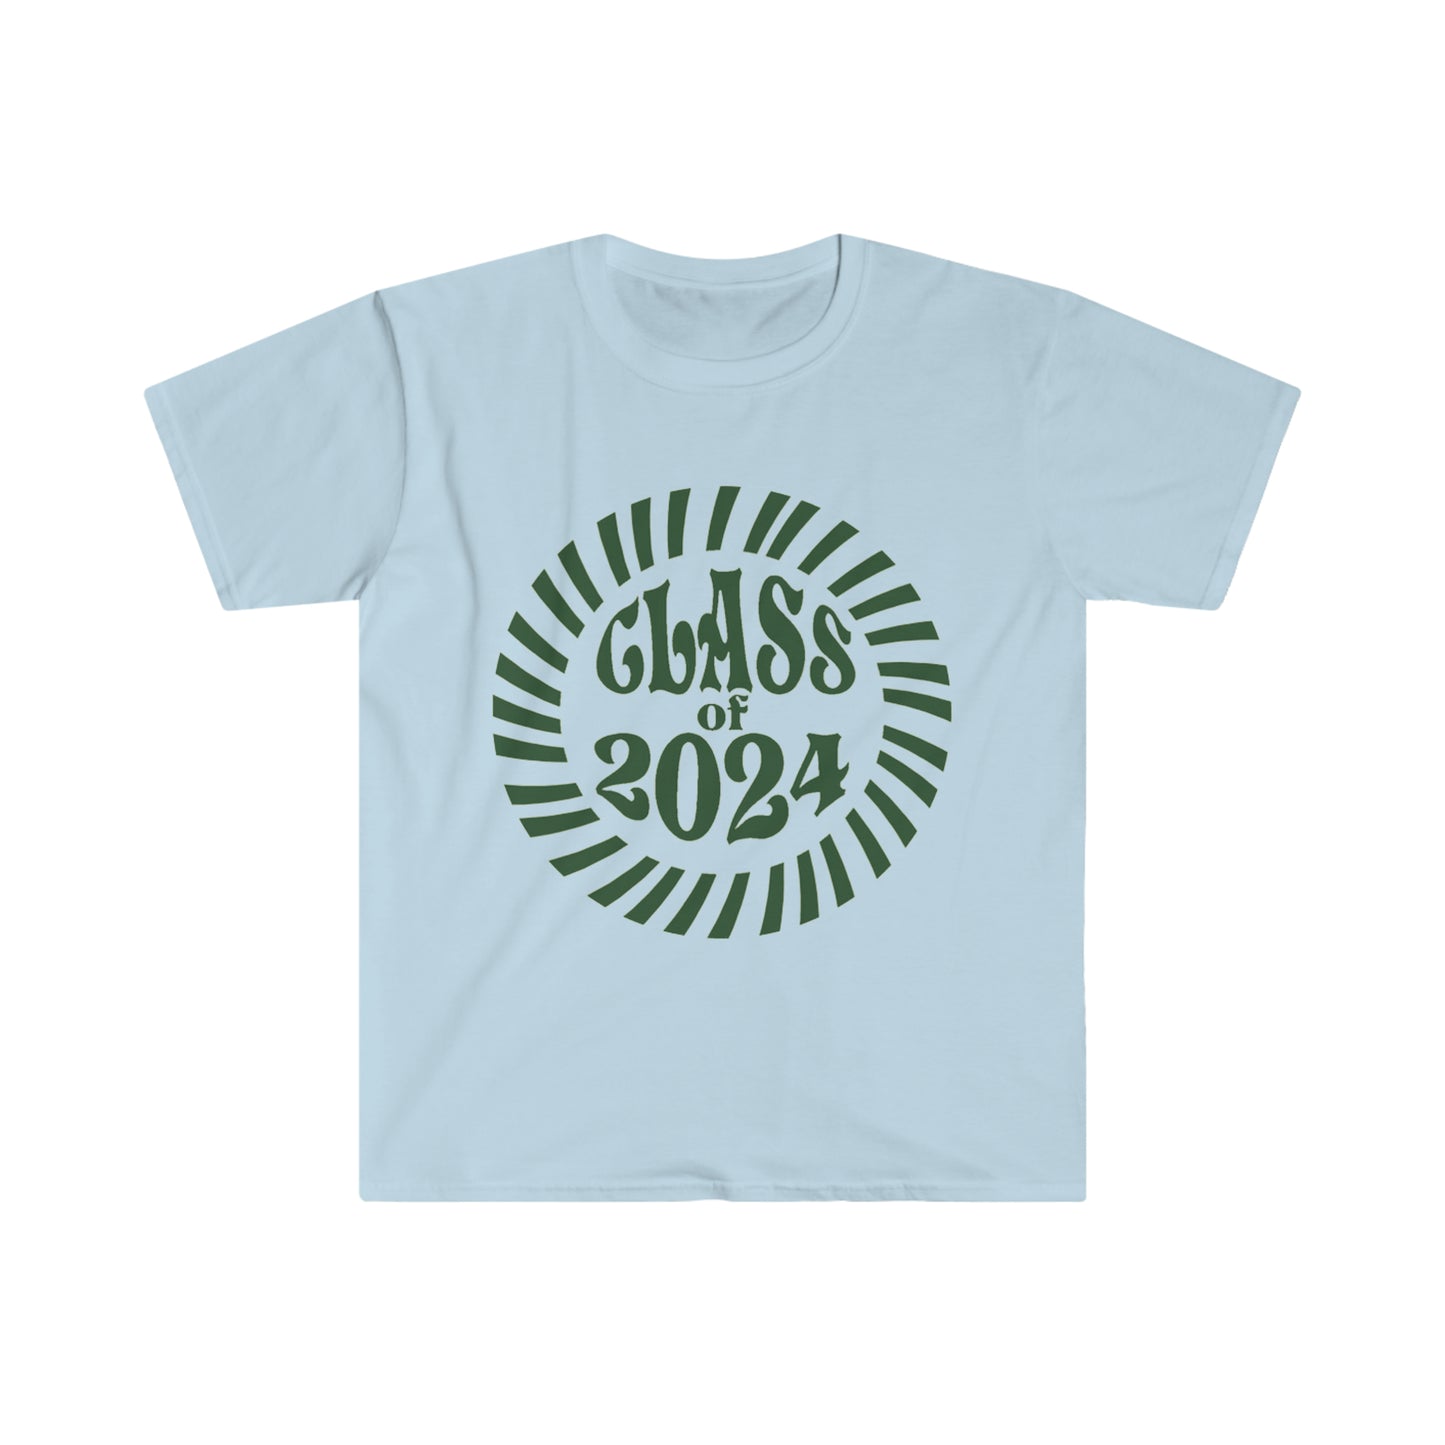 Class of 2024 - Unisex Softstyle T-Shirt